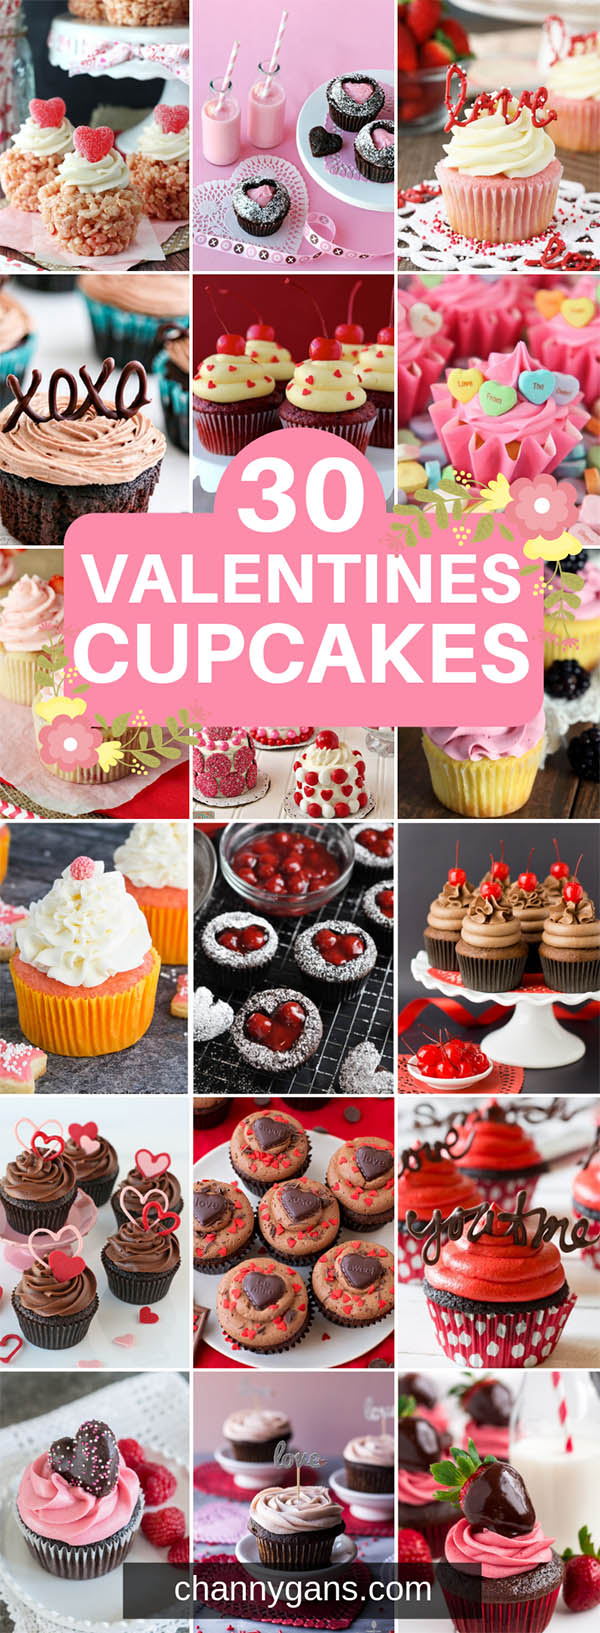 30 Valentines Day Cupcakes. Get ready for love at first bite with these cute and delicious Valentines Day Cupcakes! Surprise your loved ones with these cupcakes that are a perfect Valentines Day dessert!